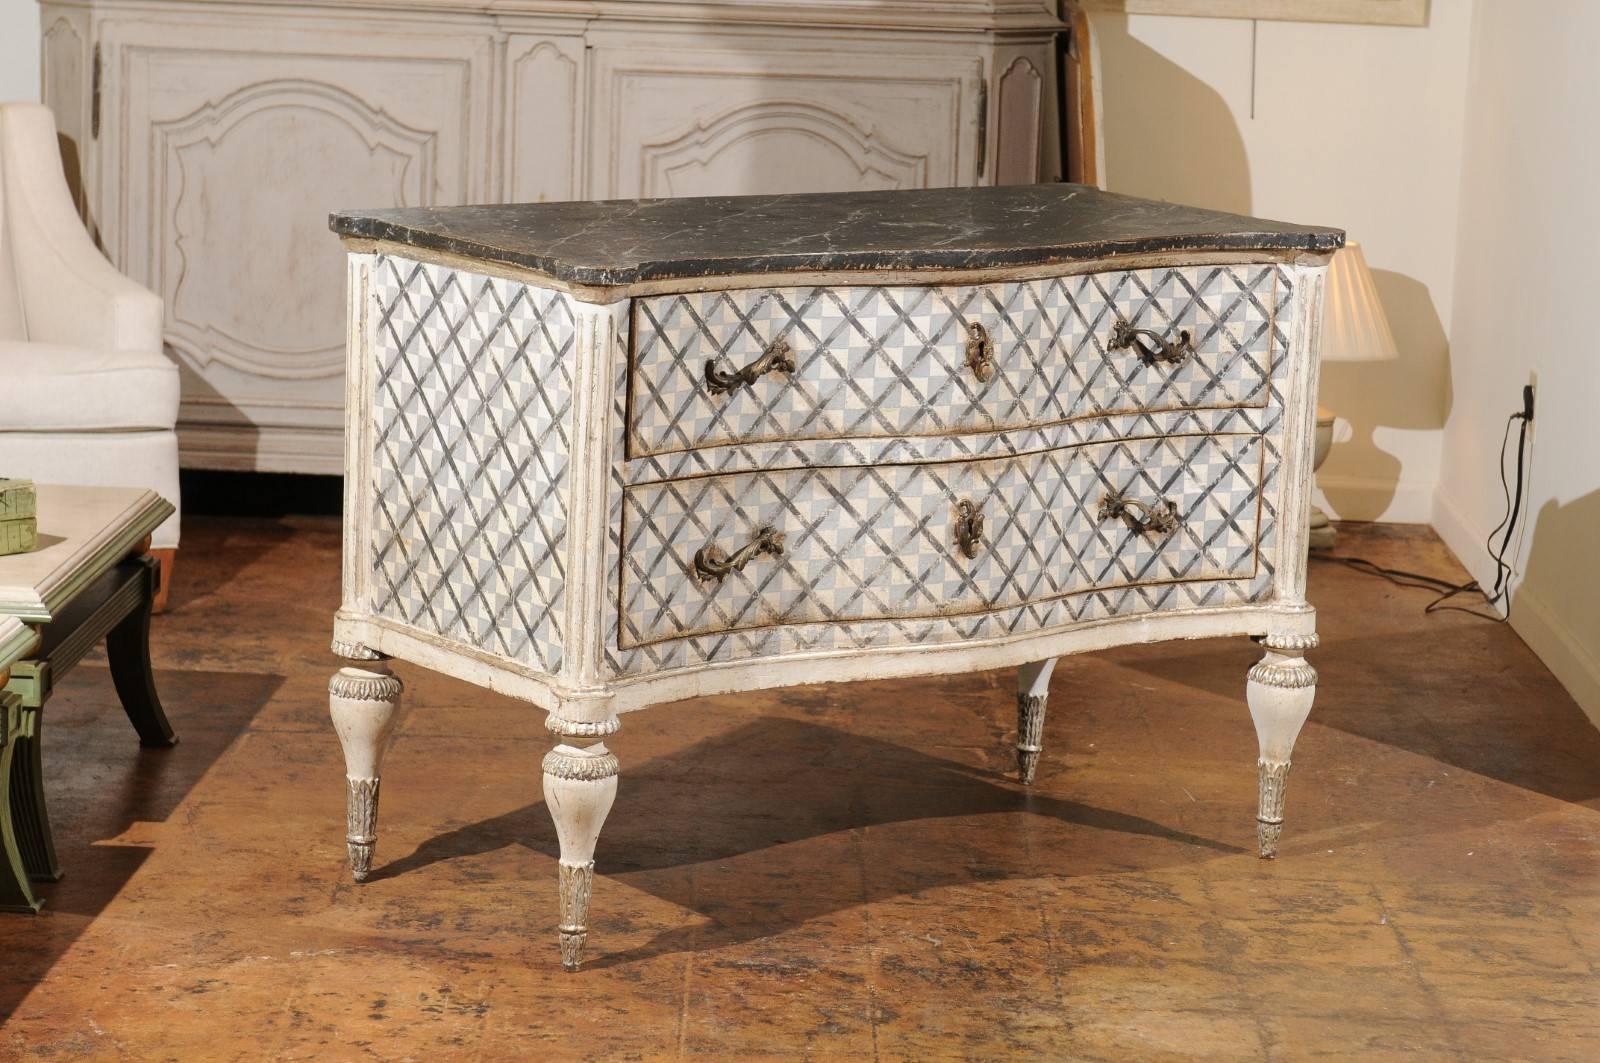 A pair of Venetian serpentine commode with hand-painted décor, silver gilt accents and marbleized top from the mid-19th century. Found in a villa in Venice, Italy, this pair of two drawer-commodes will make a statement in any room. Each commode